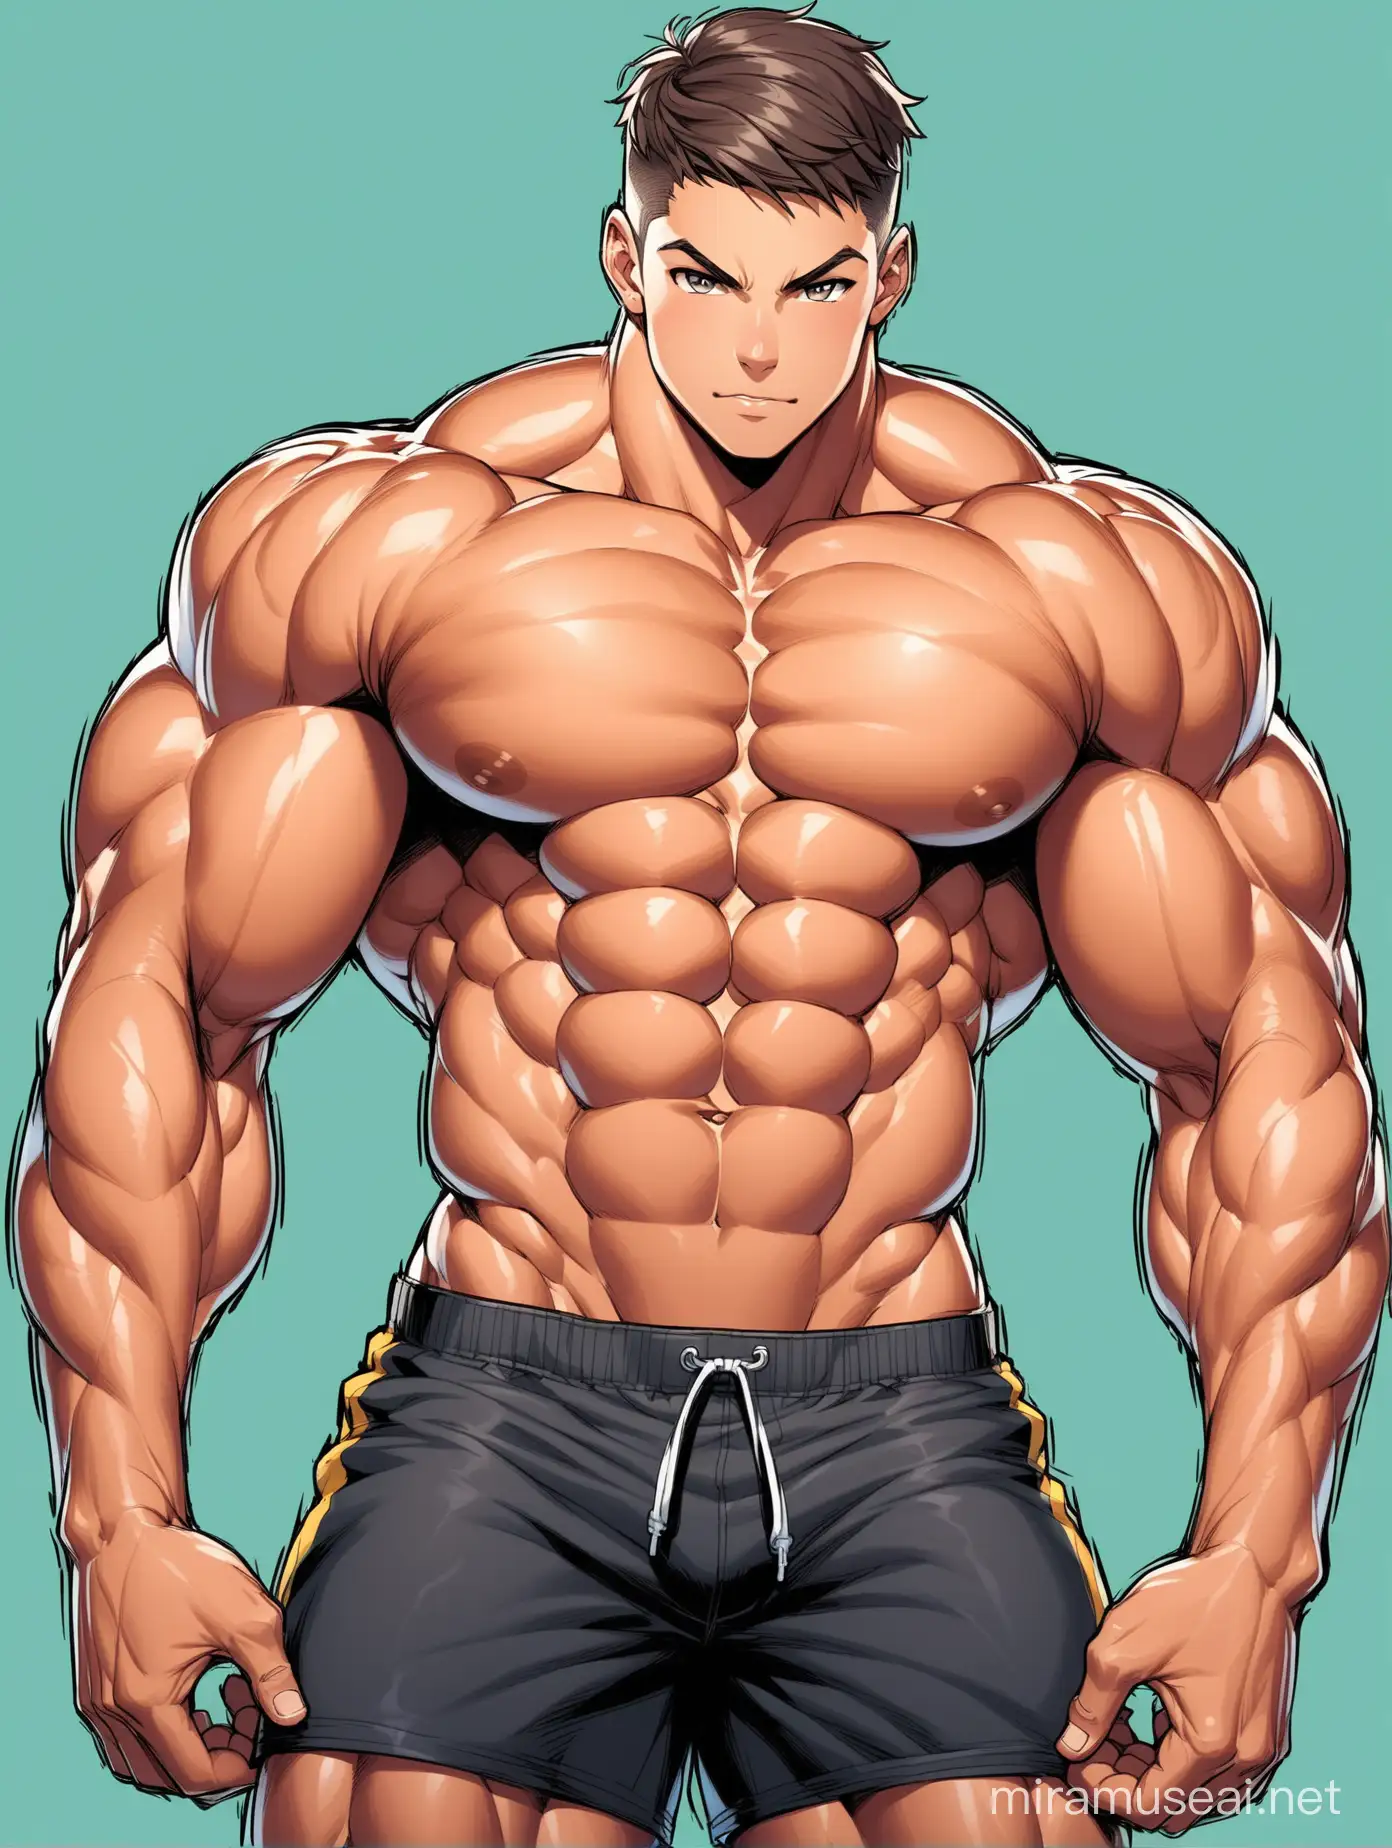 Full color drawing of an extremely muscular teenage male with very a beautiful, delicate face, wide shoulders, huge biceps, hard six-pack abs, and very strong and powerful legs, wearing shorts or trunks